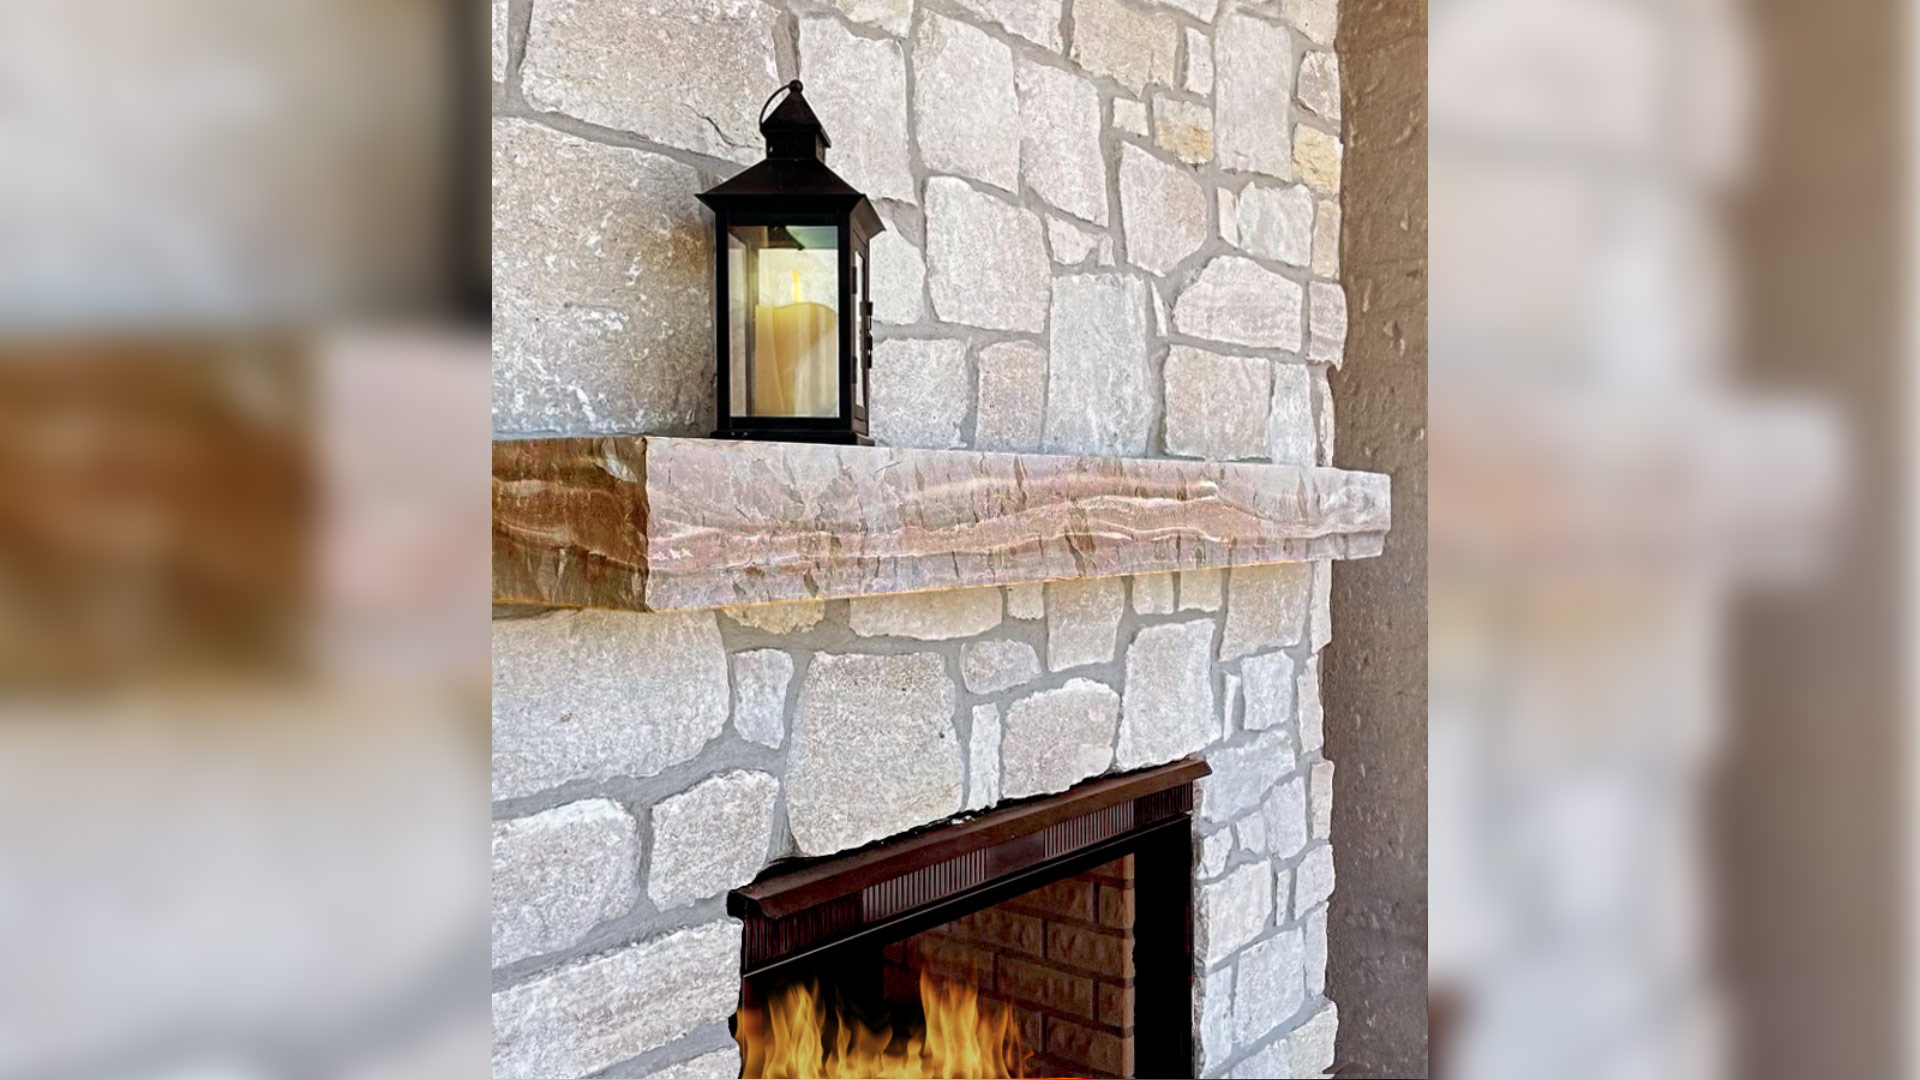 Tundra Cream Rubble natural stone thin veneer installed on fireplace.